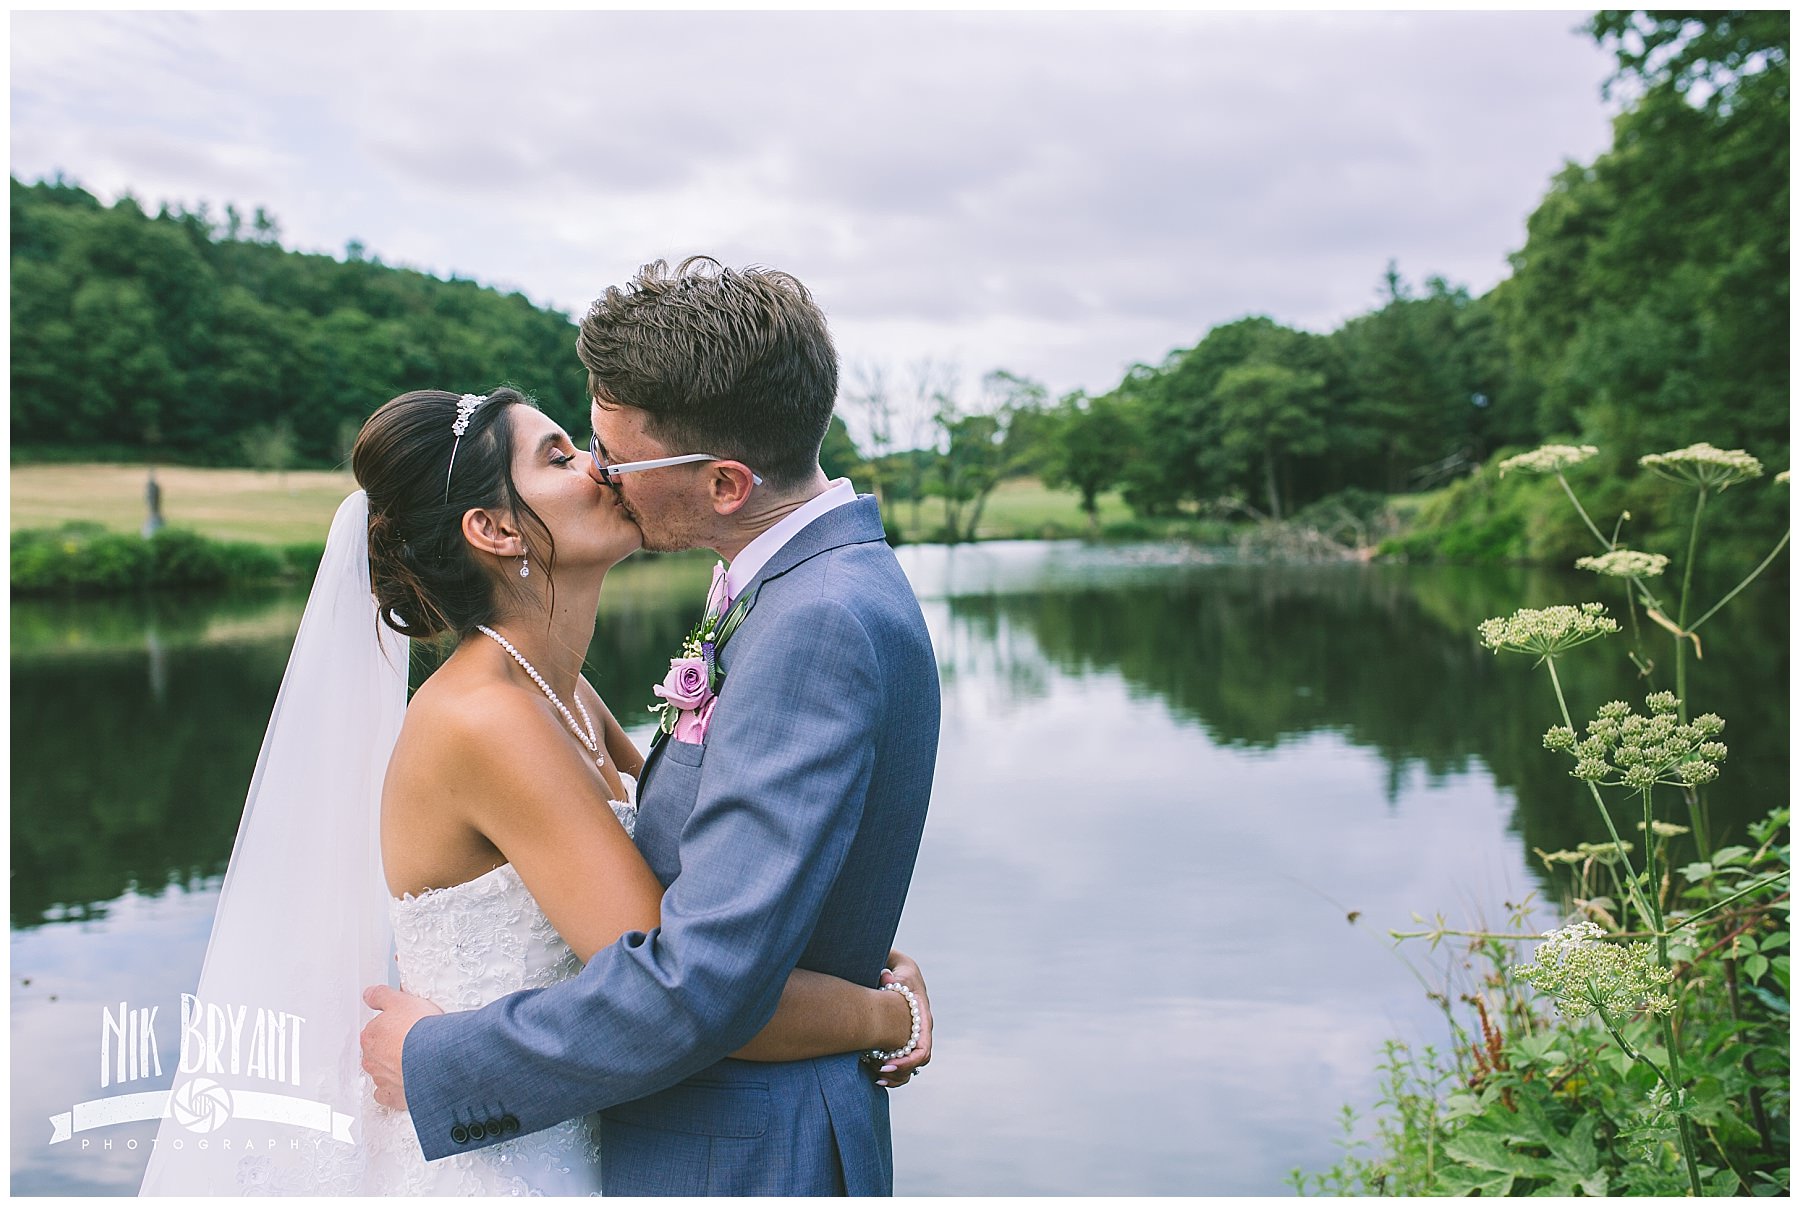 Shrigley Hall Wedding Photography by the lake